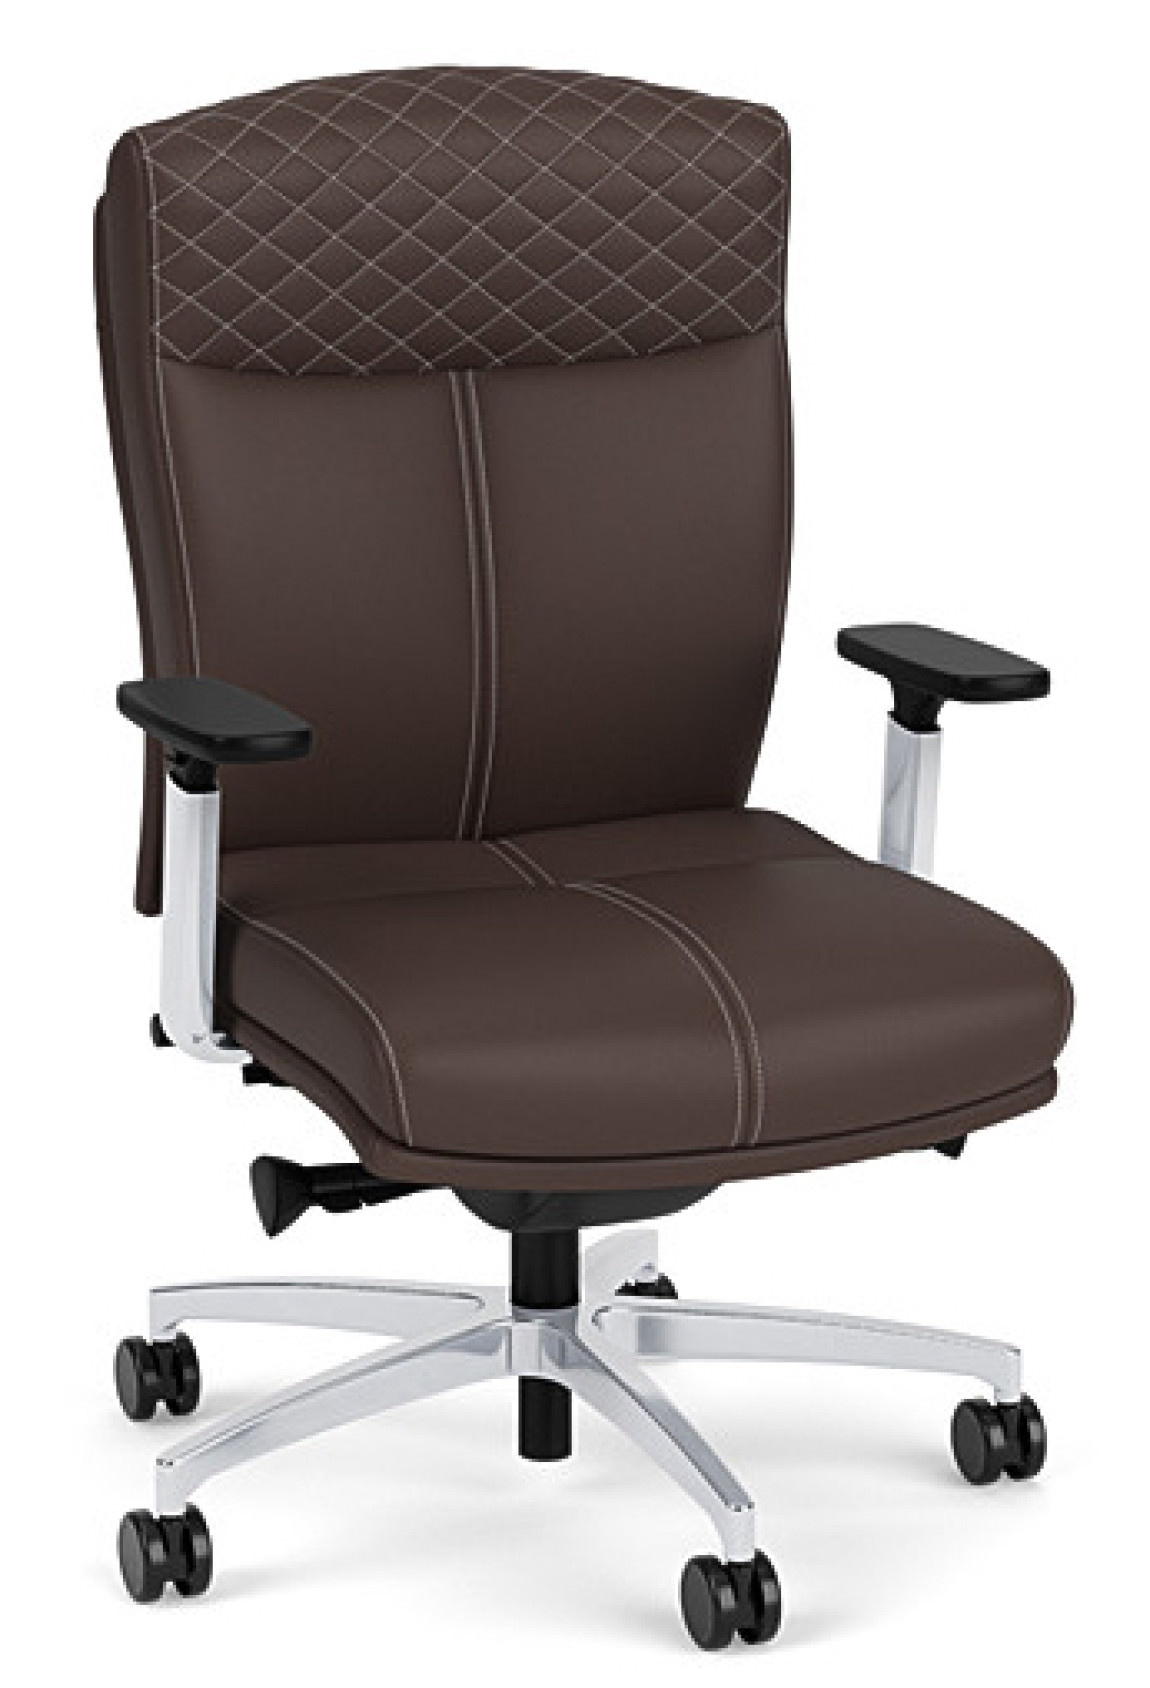 Leather Executive Mid Back Chair with Lumbar Support